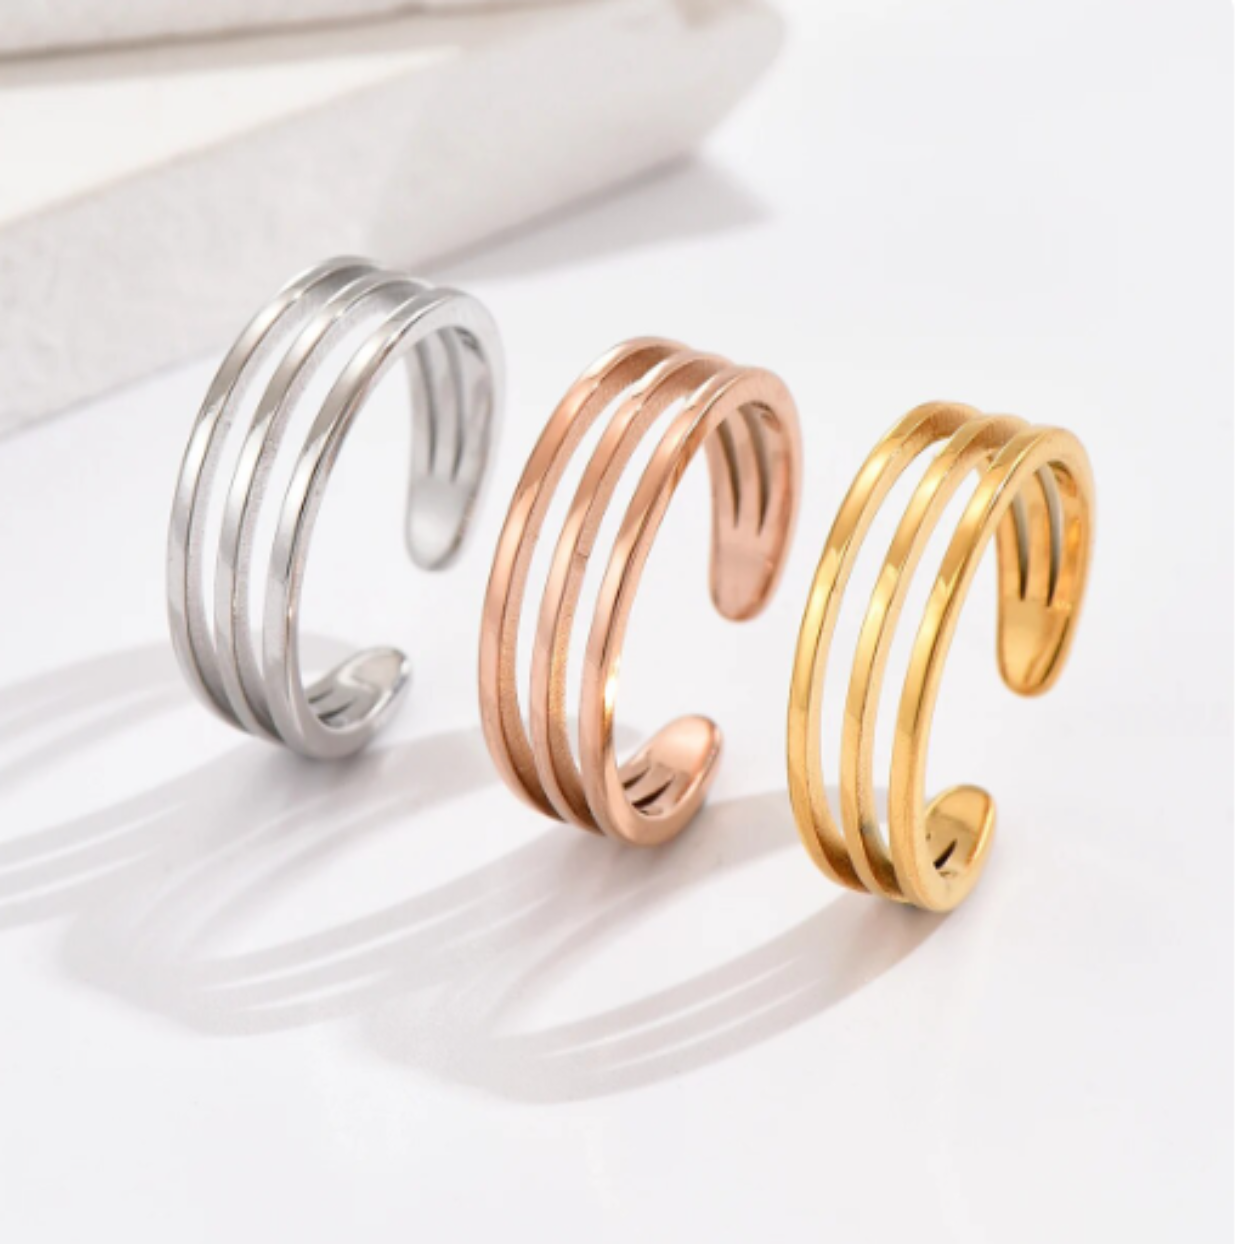 STACK TOE RING  - ROSE GOLD / GOLD & SILVER WATERPROOF TOE RINGS - Premium Rings from www.beachboho.com.au - Just $22! Shop now at www.beachboho.com.au